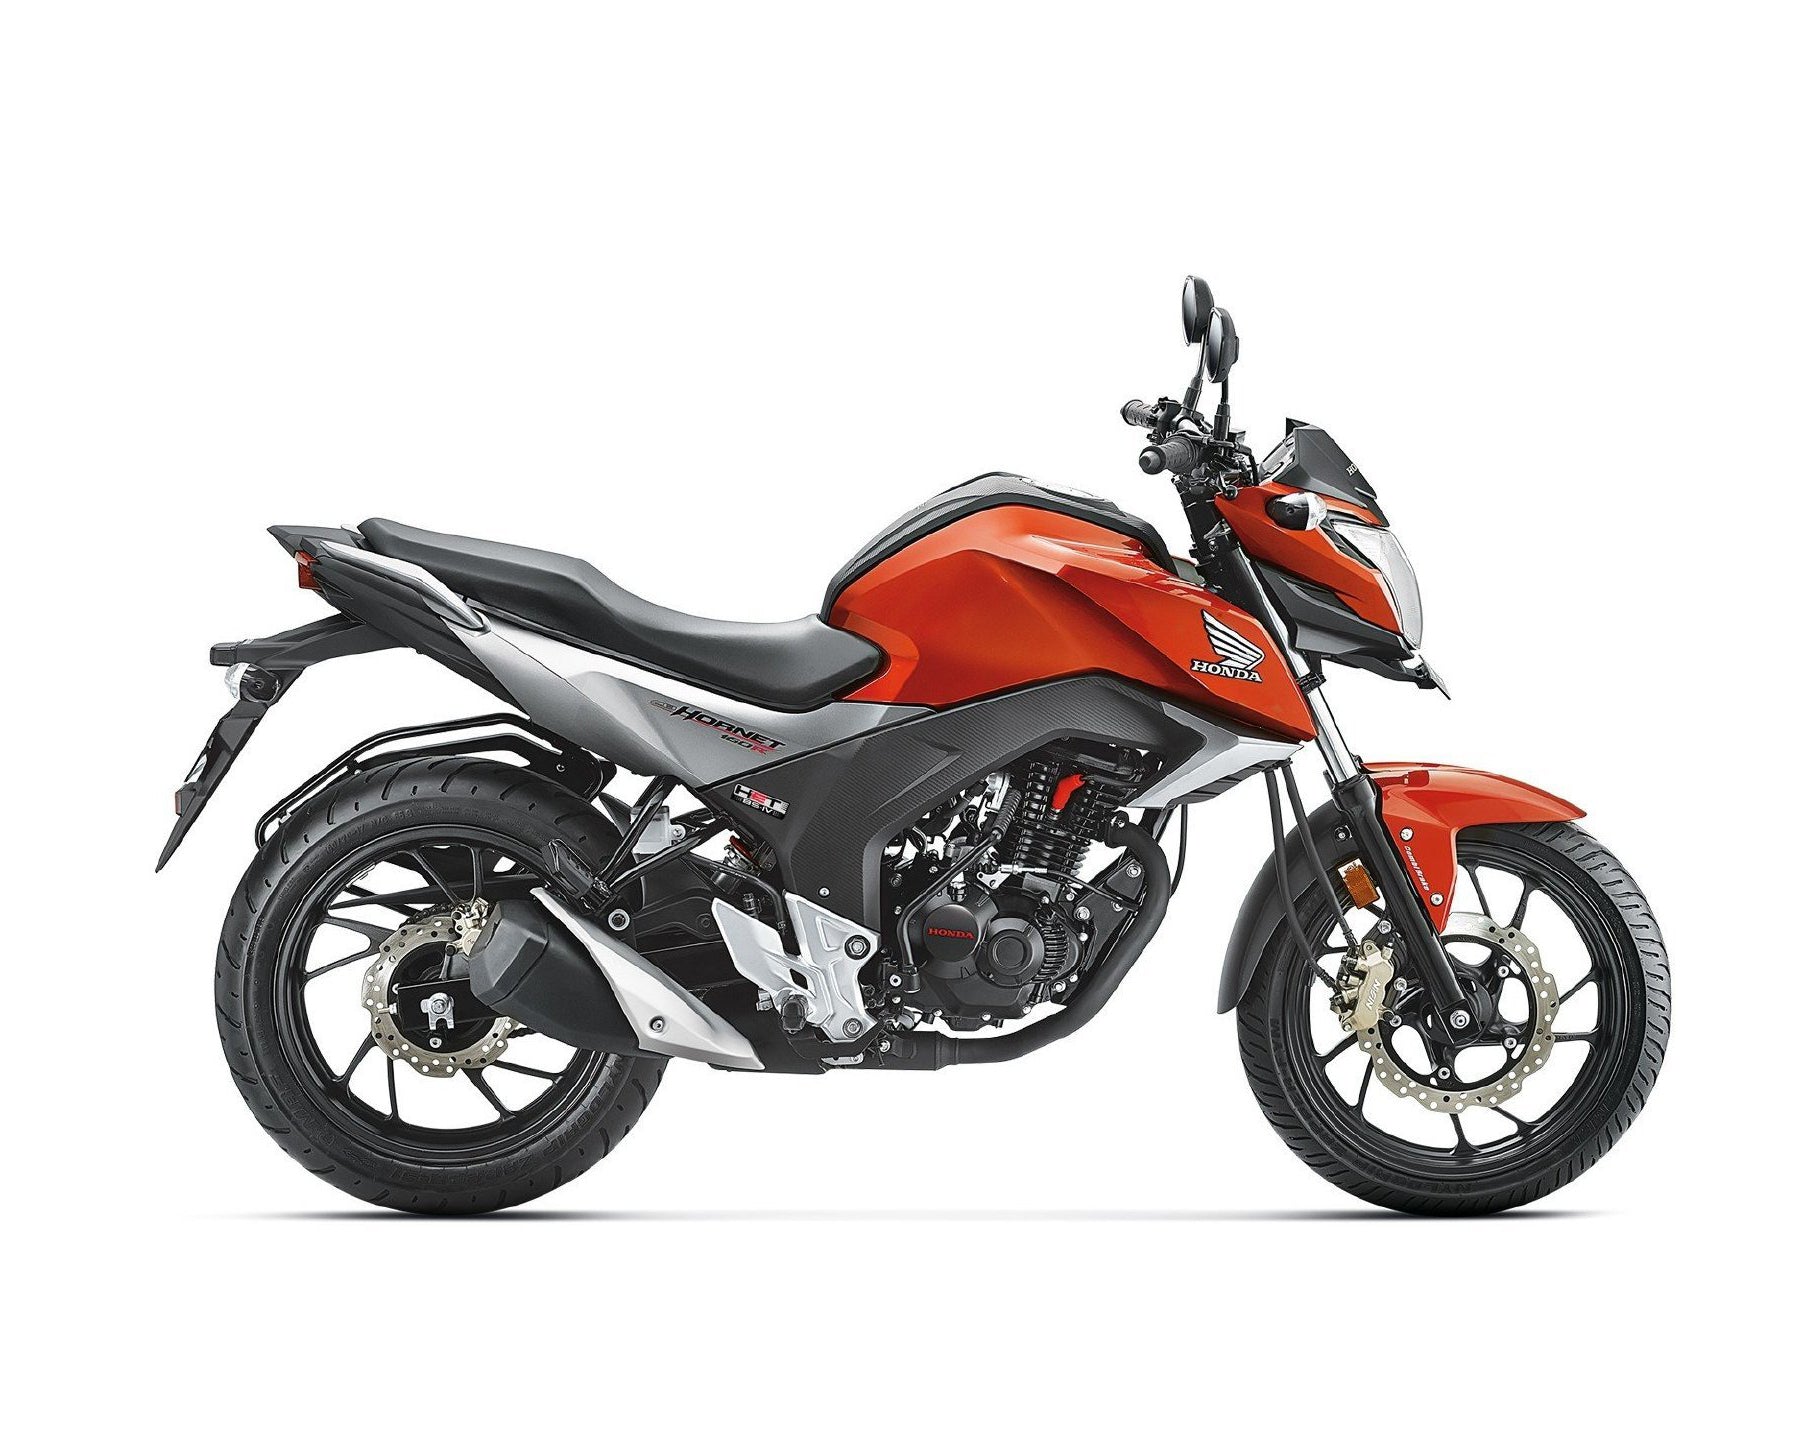 KTM-Products